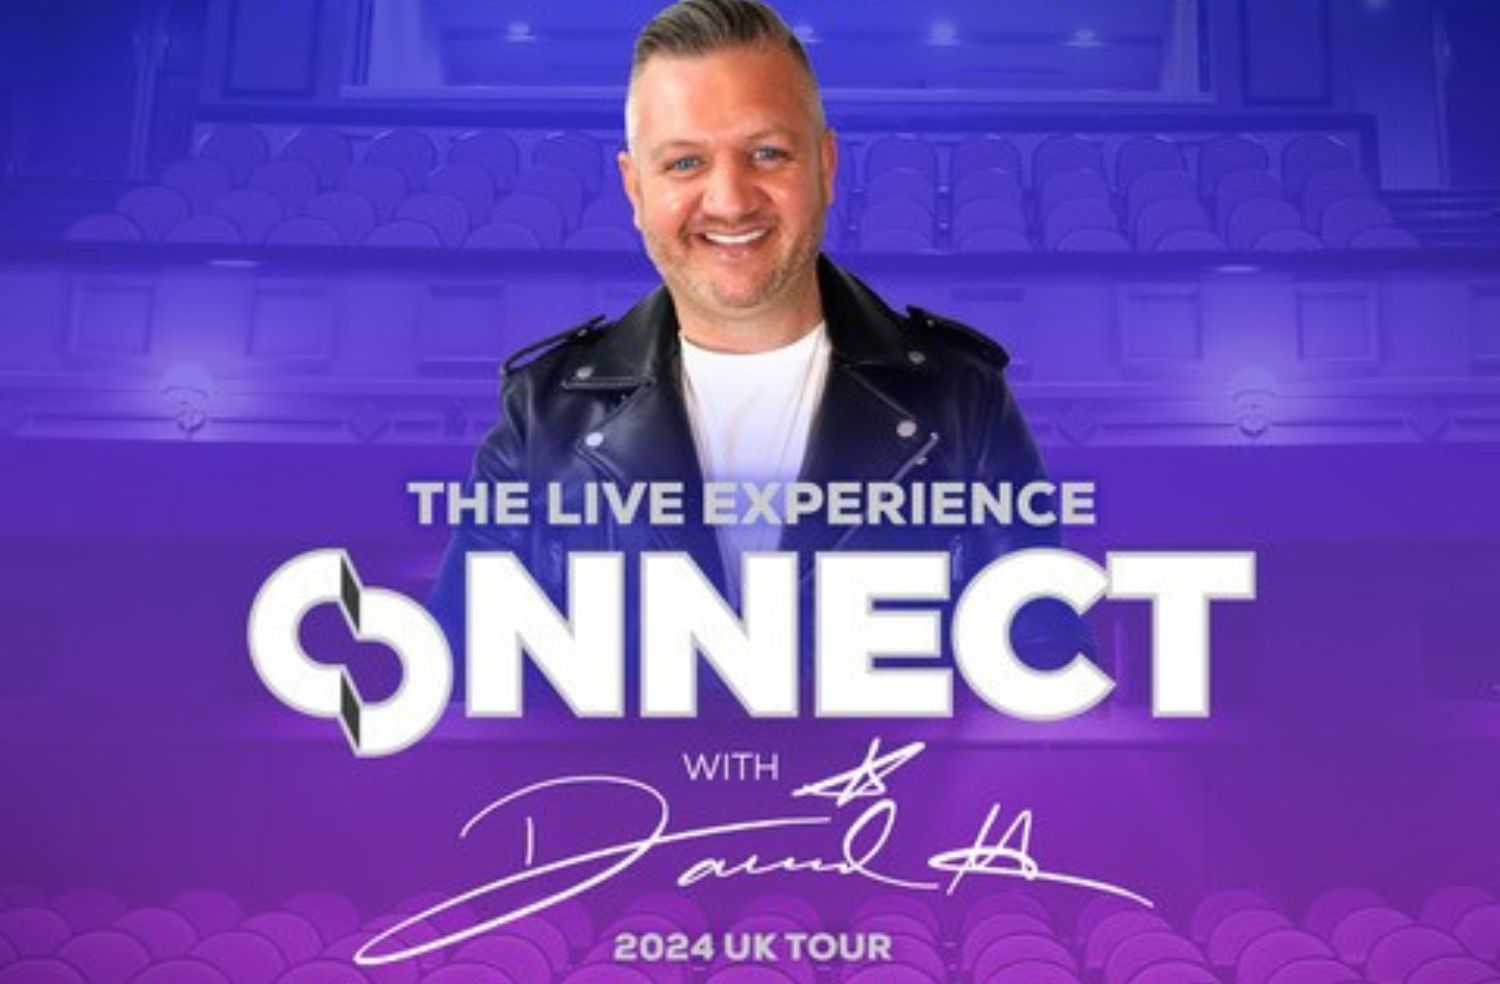 CONNECT WITH DAVID: The Live Experience